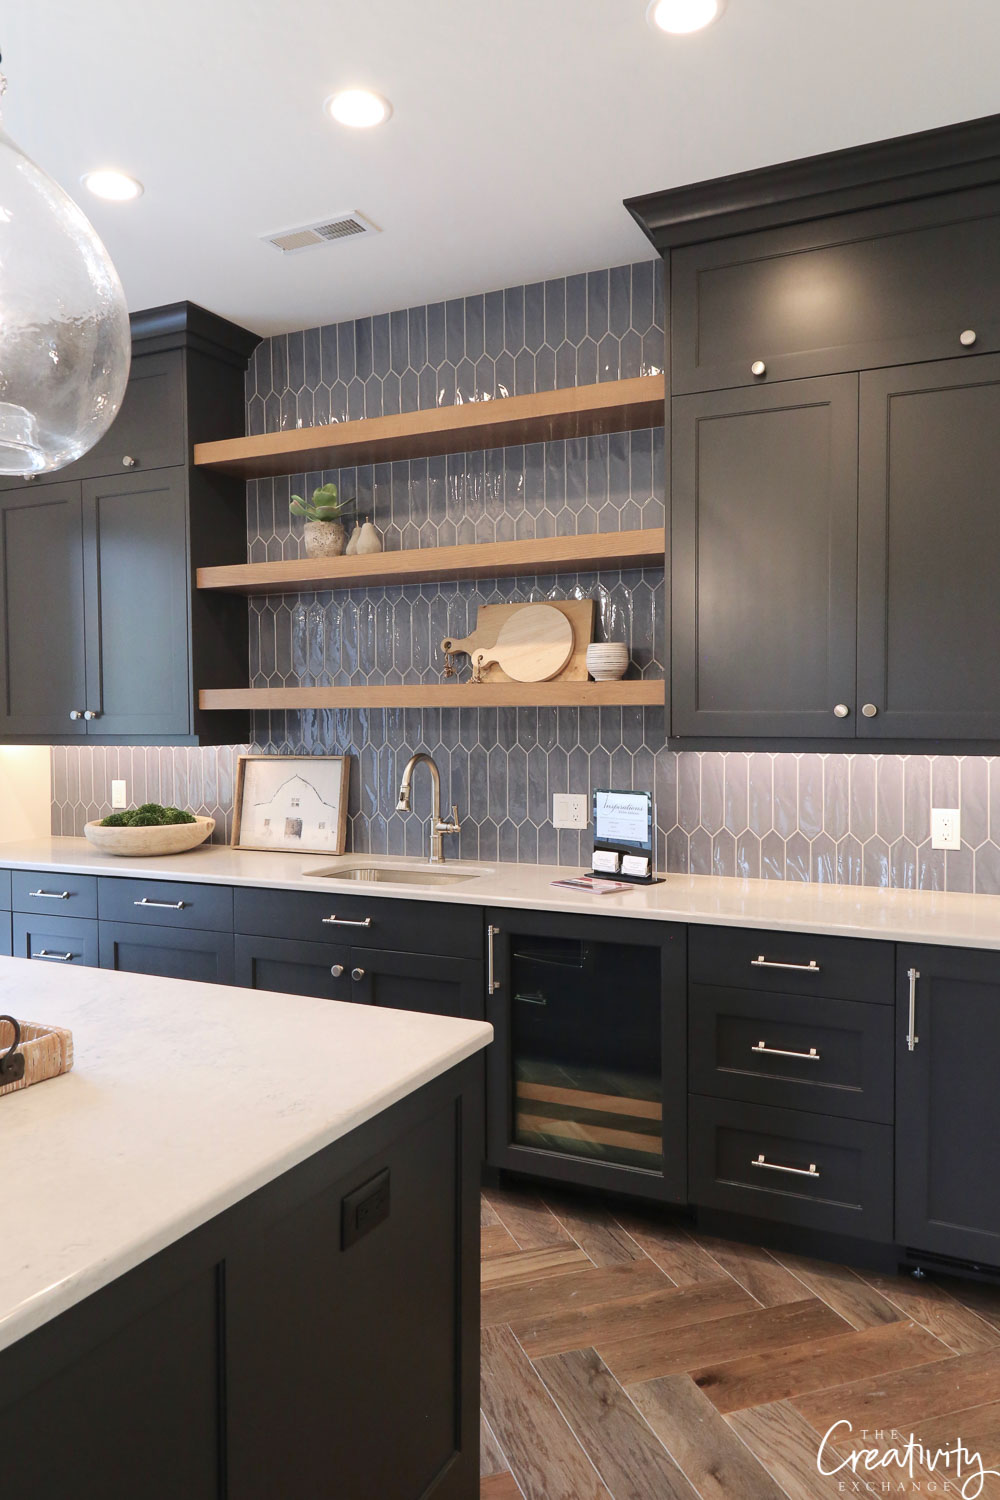 How To Choose Cabinet Hardware To Match Kitchen Decor